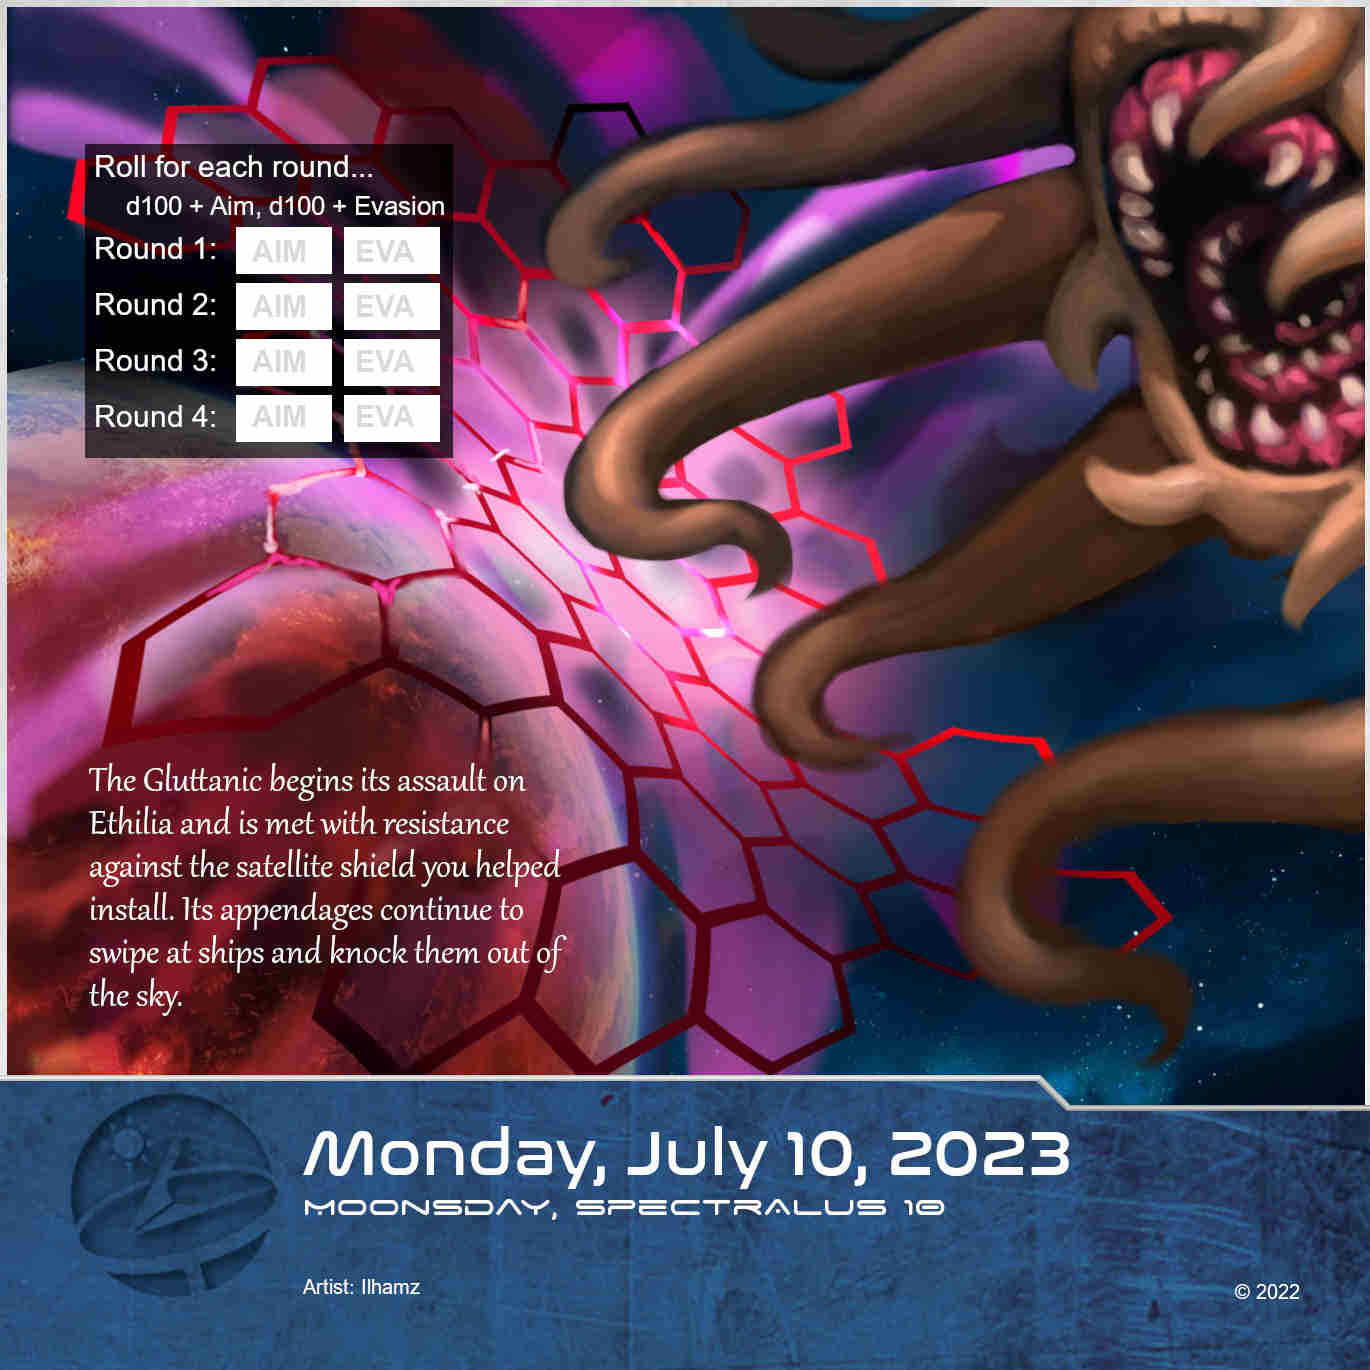 2023 Quest Calendar Voidspark Chronicles with Hero Book